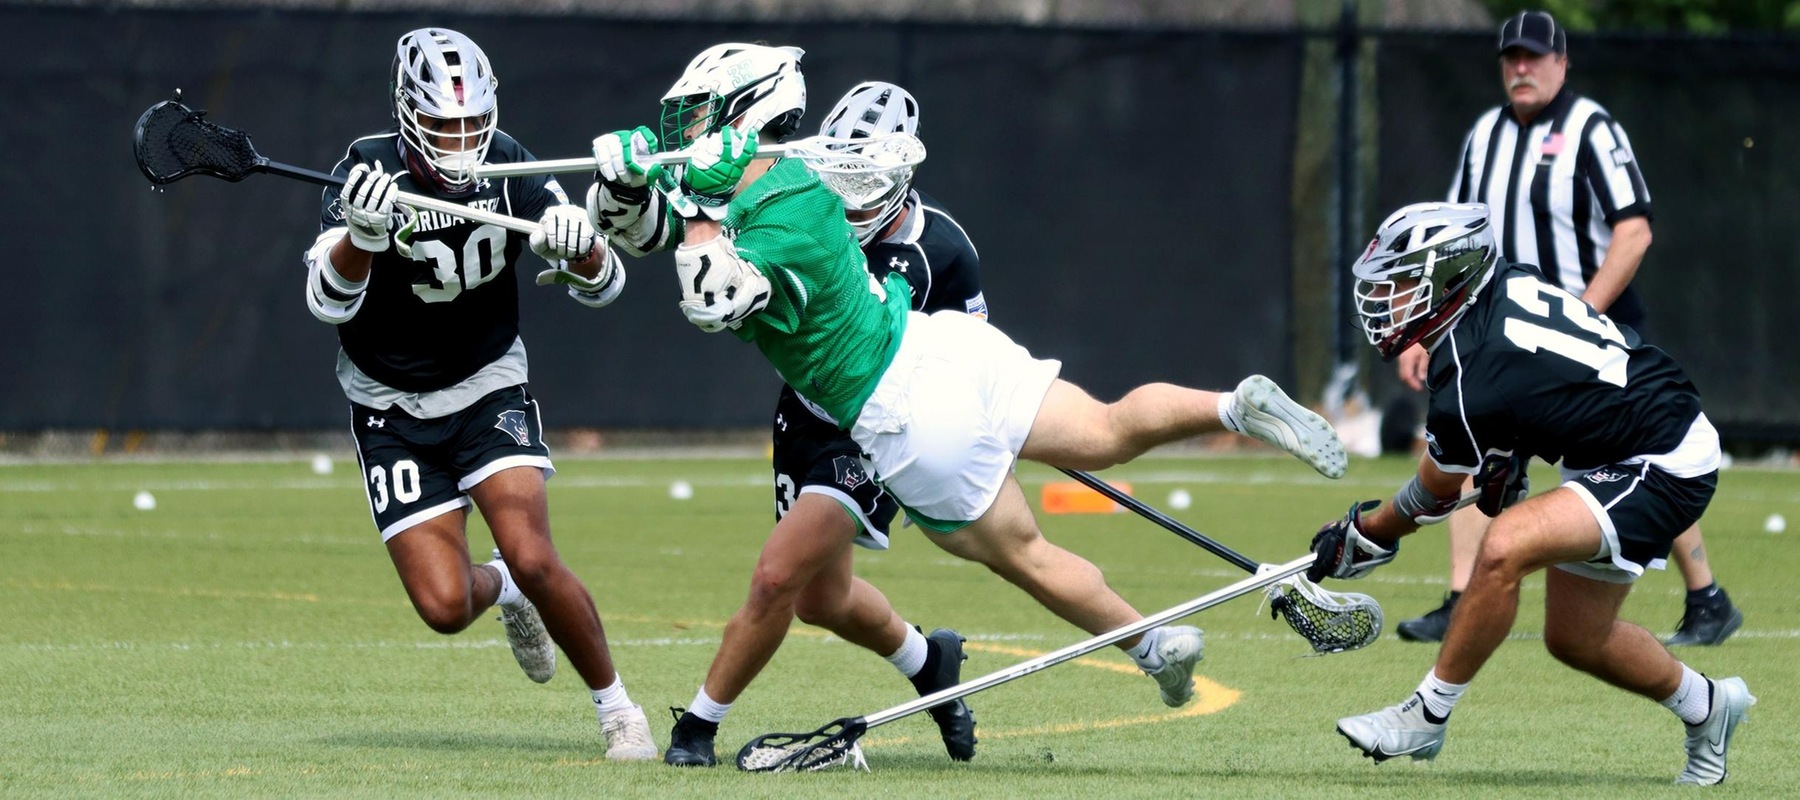 Photo of Giovanni Marino scoring one of his three goals against No. 15 Florida Tech on Monday. Copyright 2022; Wilmington University. All rights reserved. Photo by Mitchell Coll